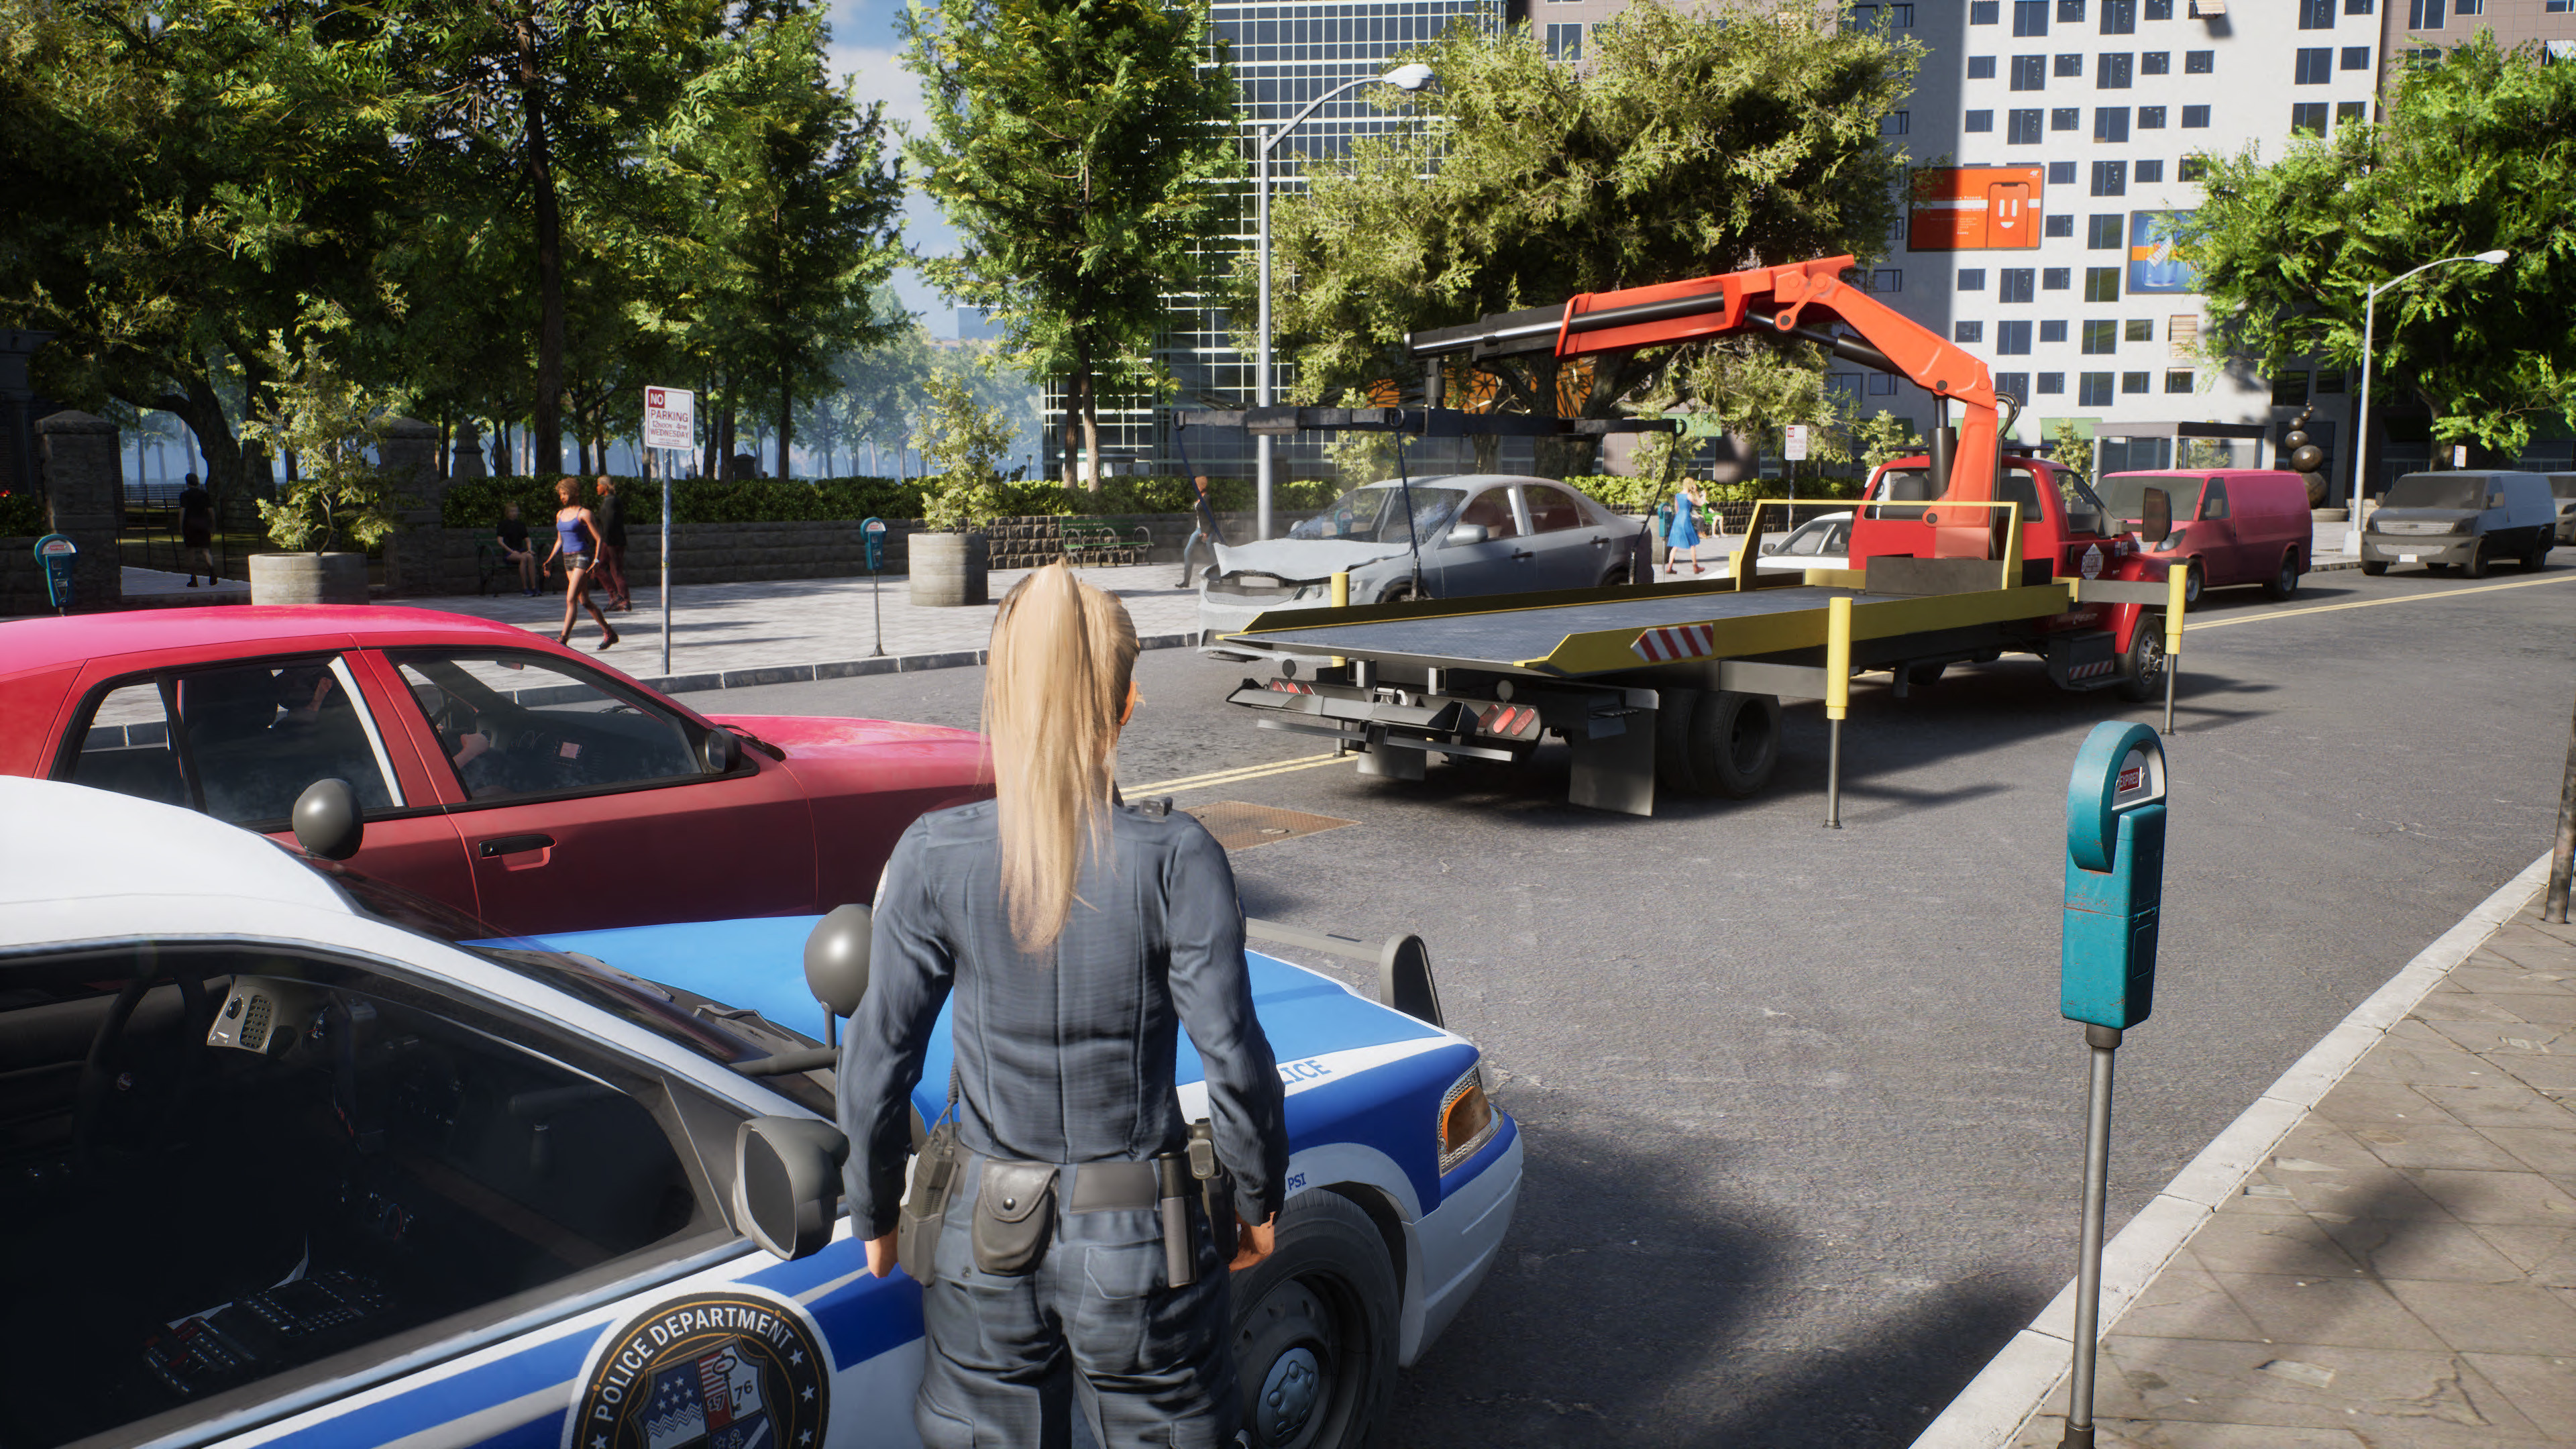 Police Simulator: Patrol Officers Free Download for PC